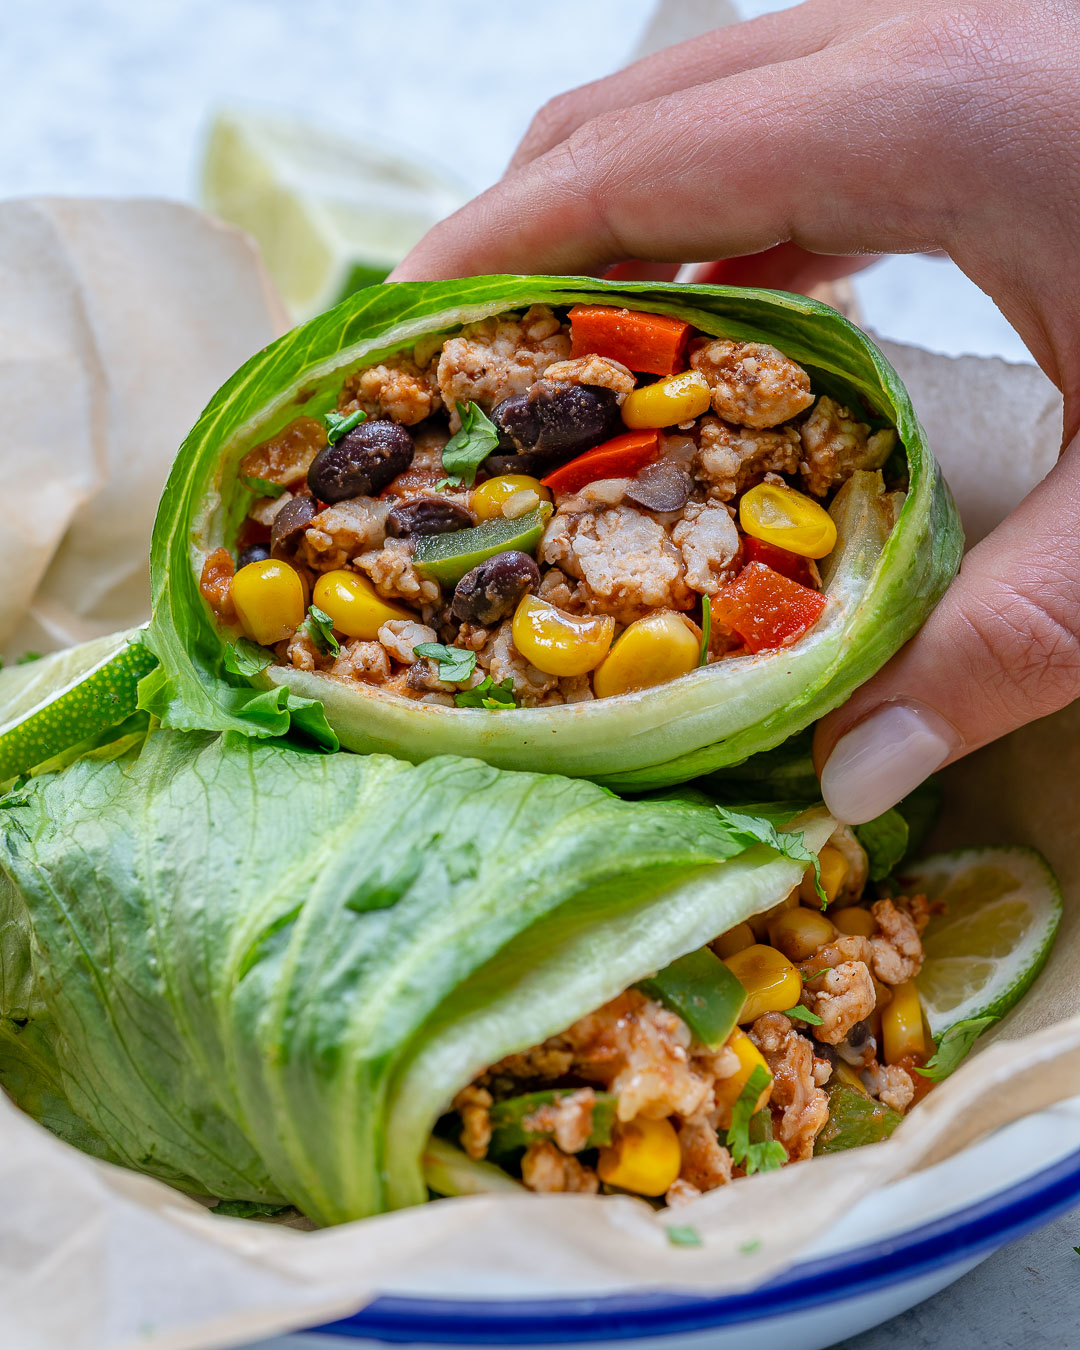 Eat Healthy Lettuce Wrapped Burritos